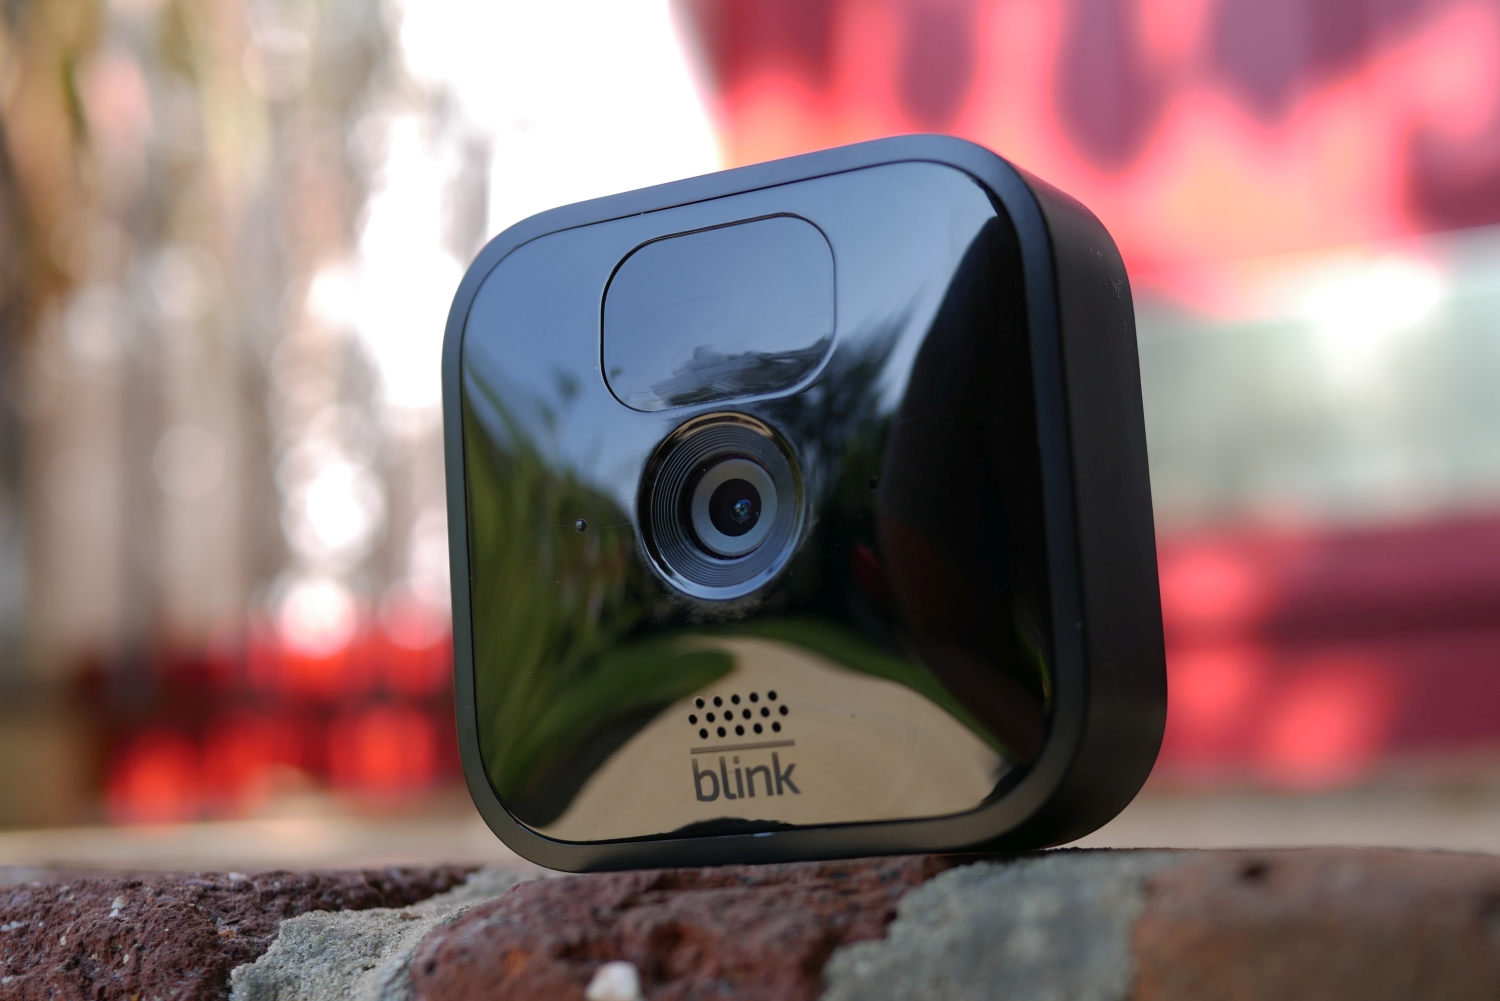 Blink Outdoor 4 Battery-Powered Smart Security Camera - 2